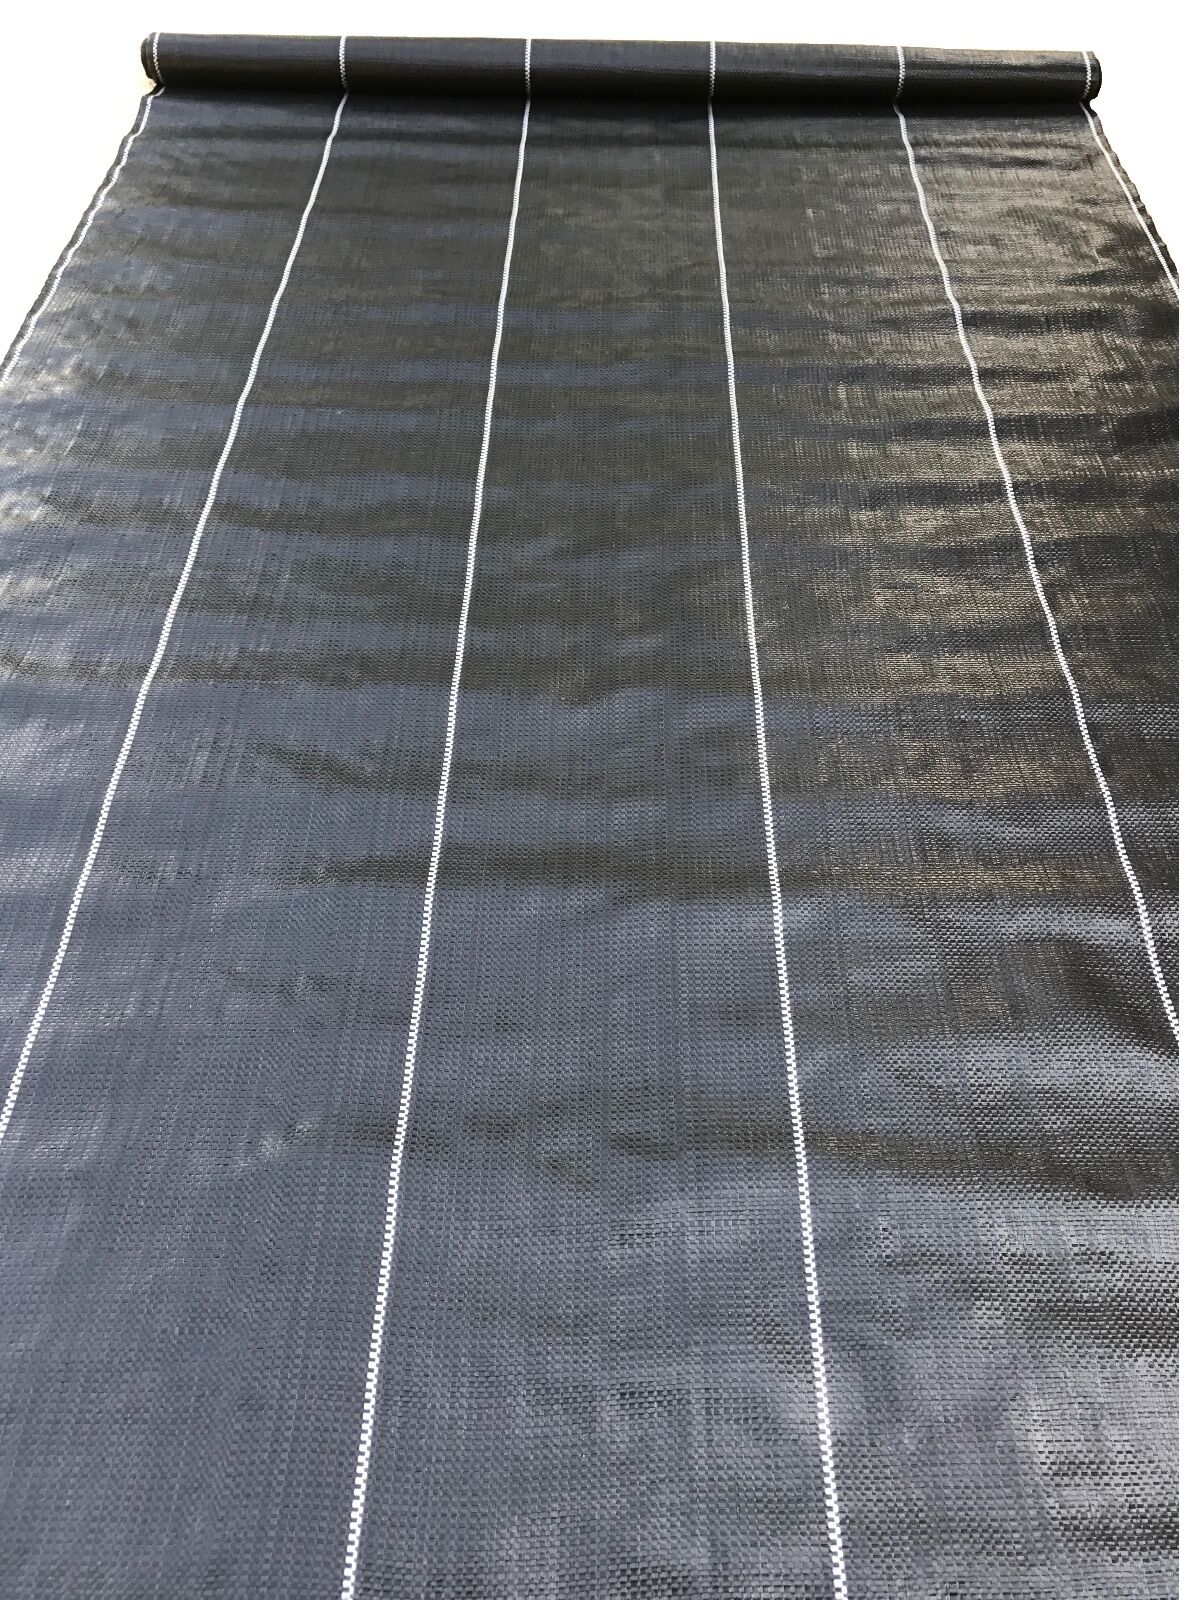 Weed Barrier Landscape Fabric Woven UV Resistant Commercial Grade 6x300ft 3.2oz